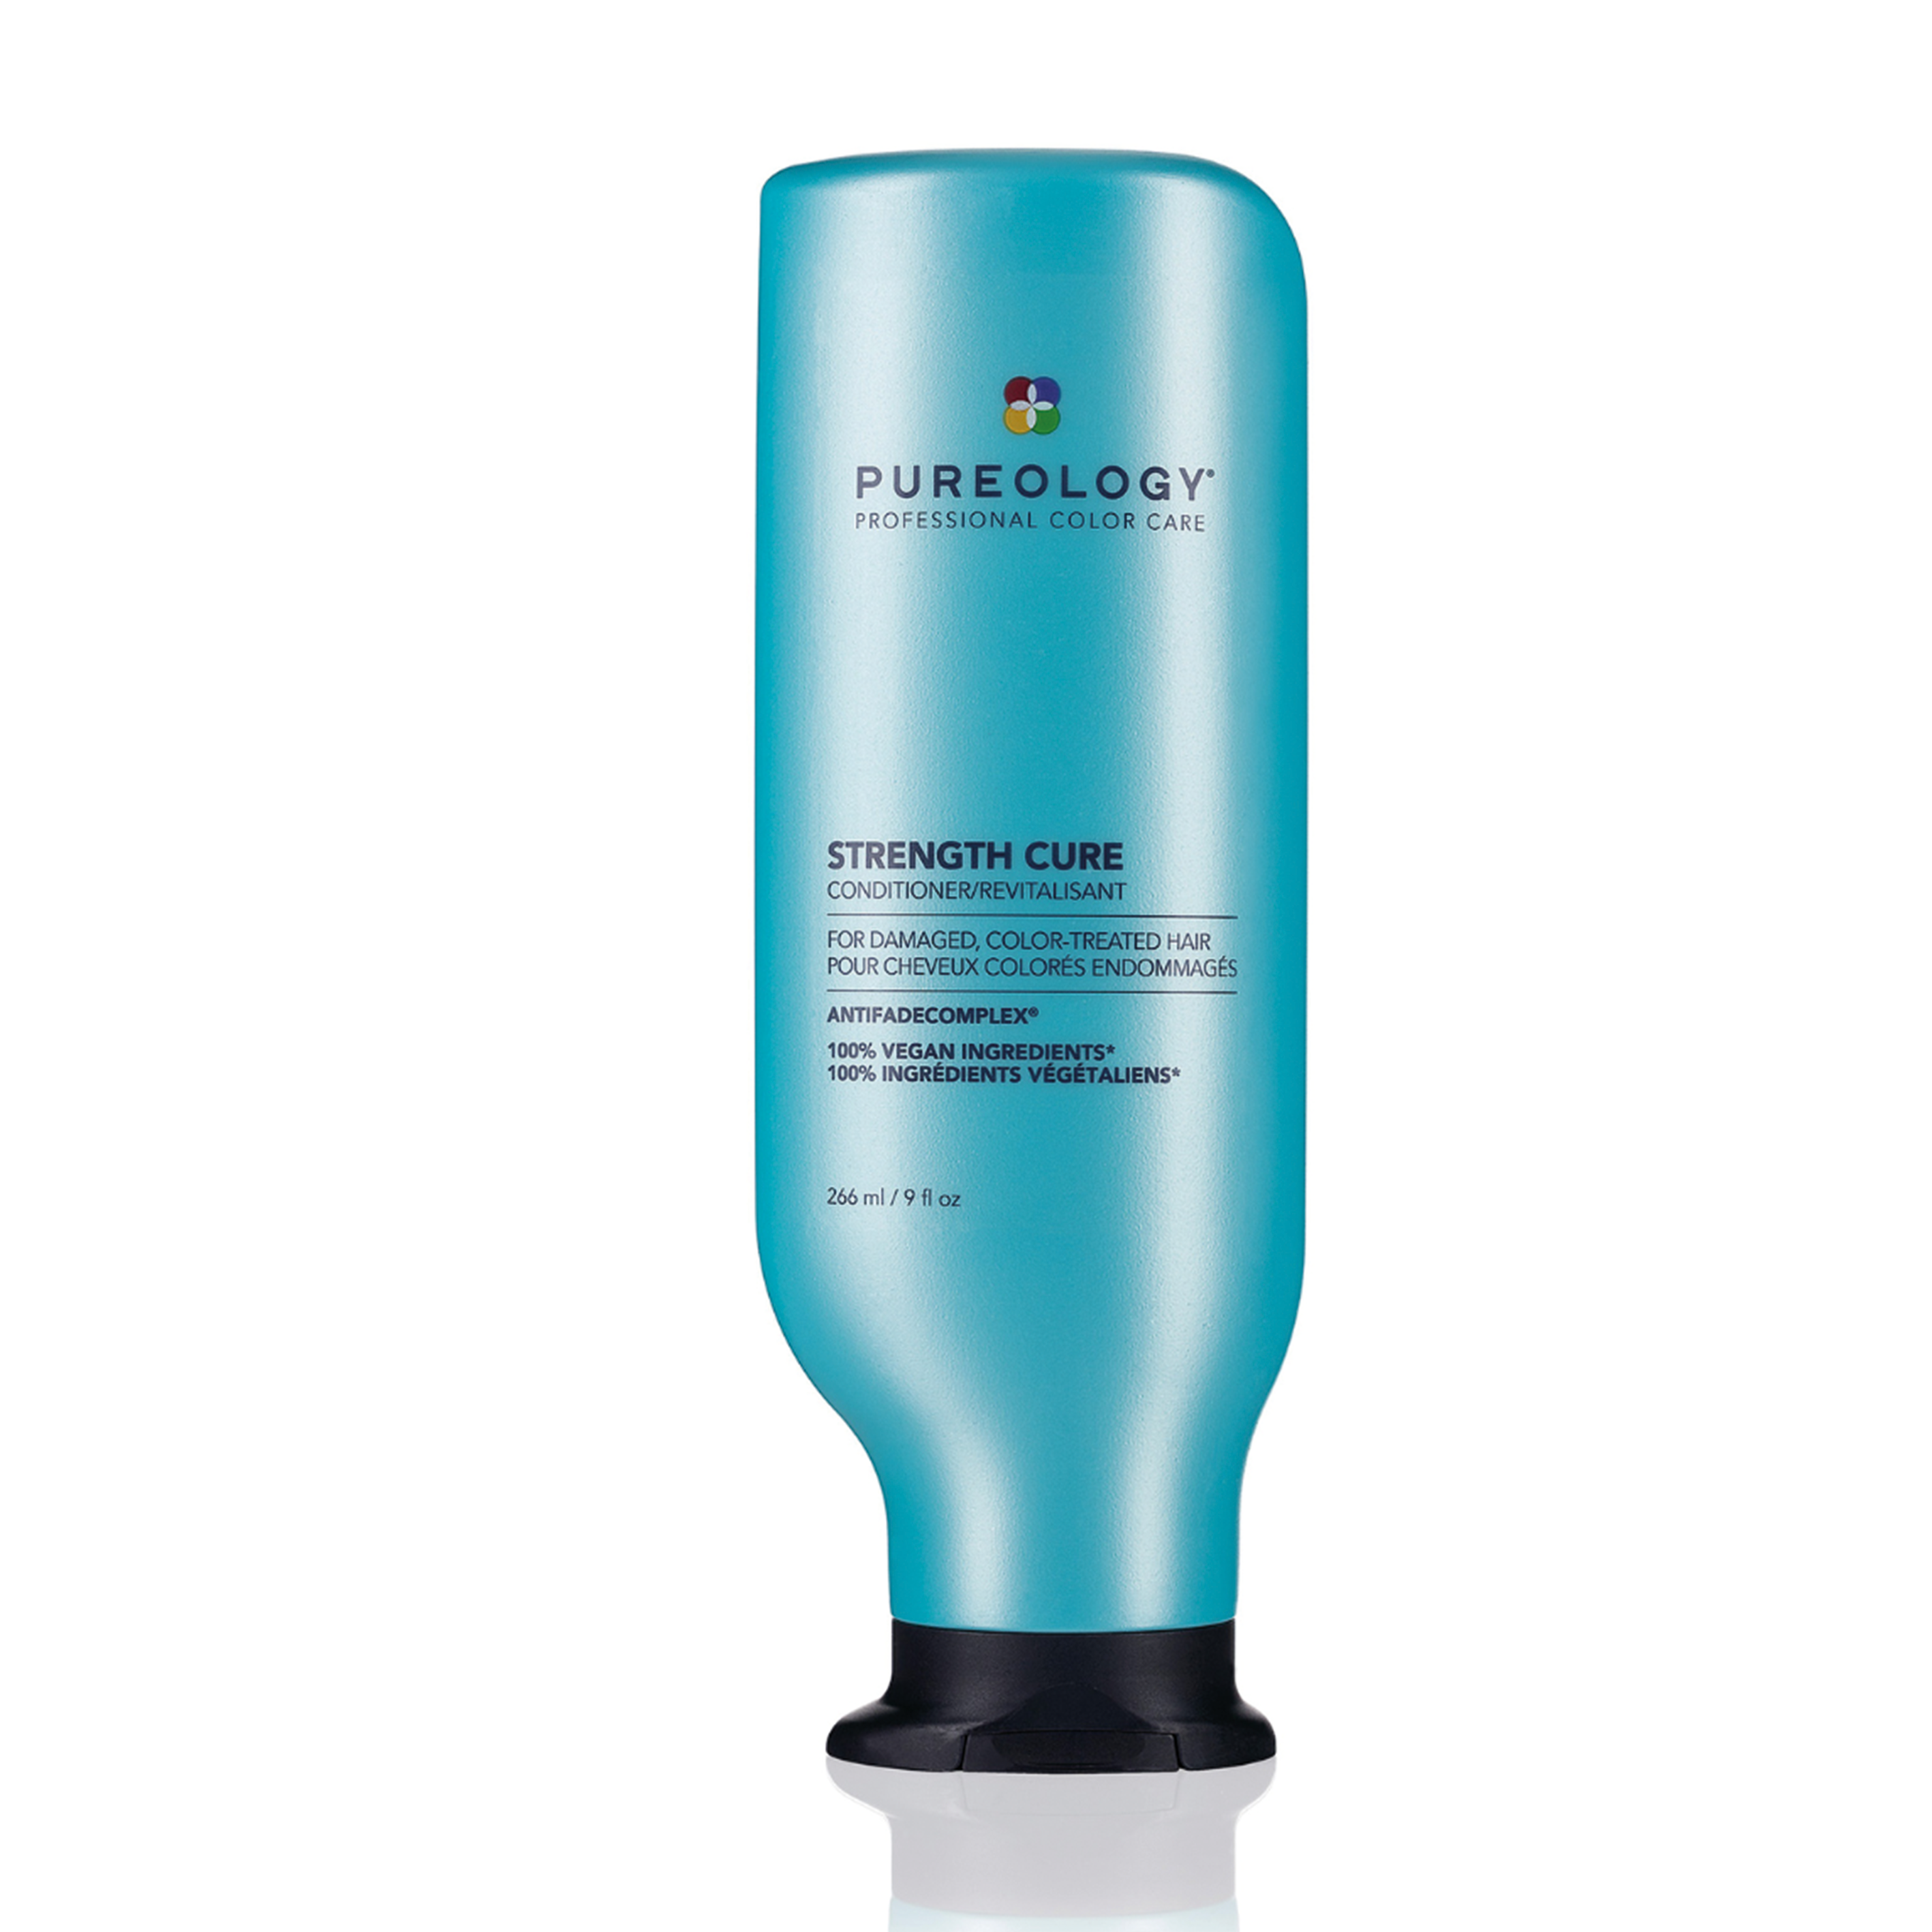 Pureology Strength Cure Conditioner (266ml)